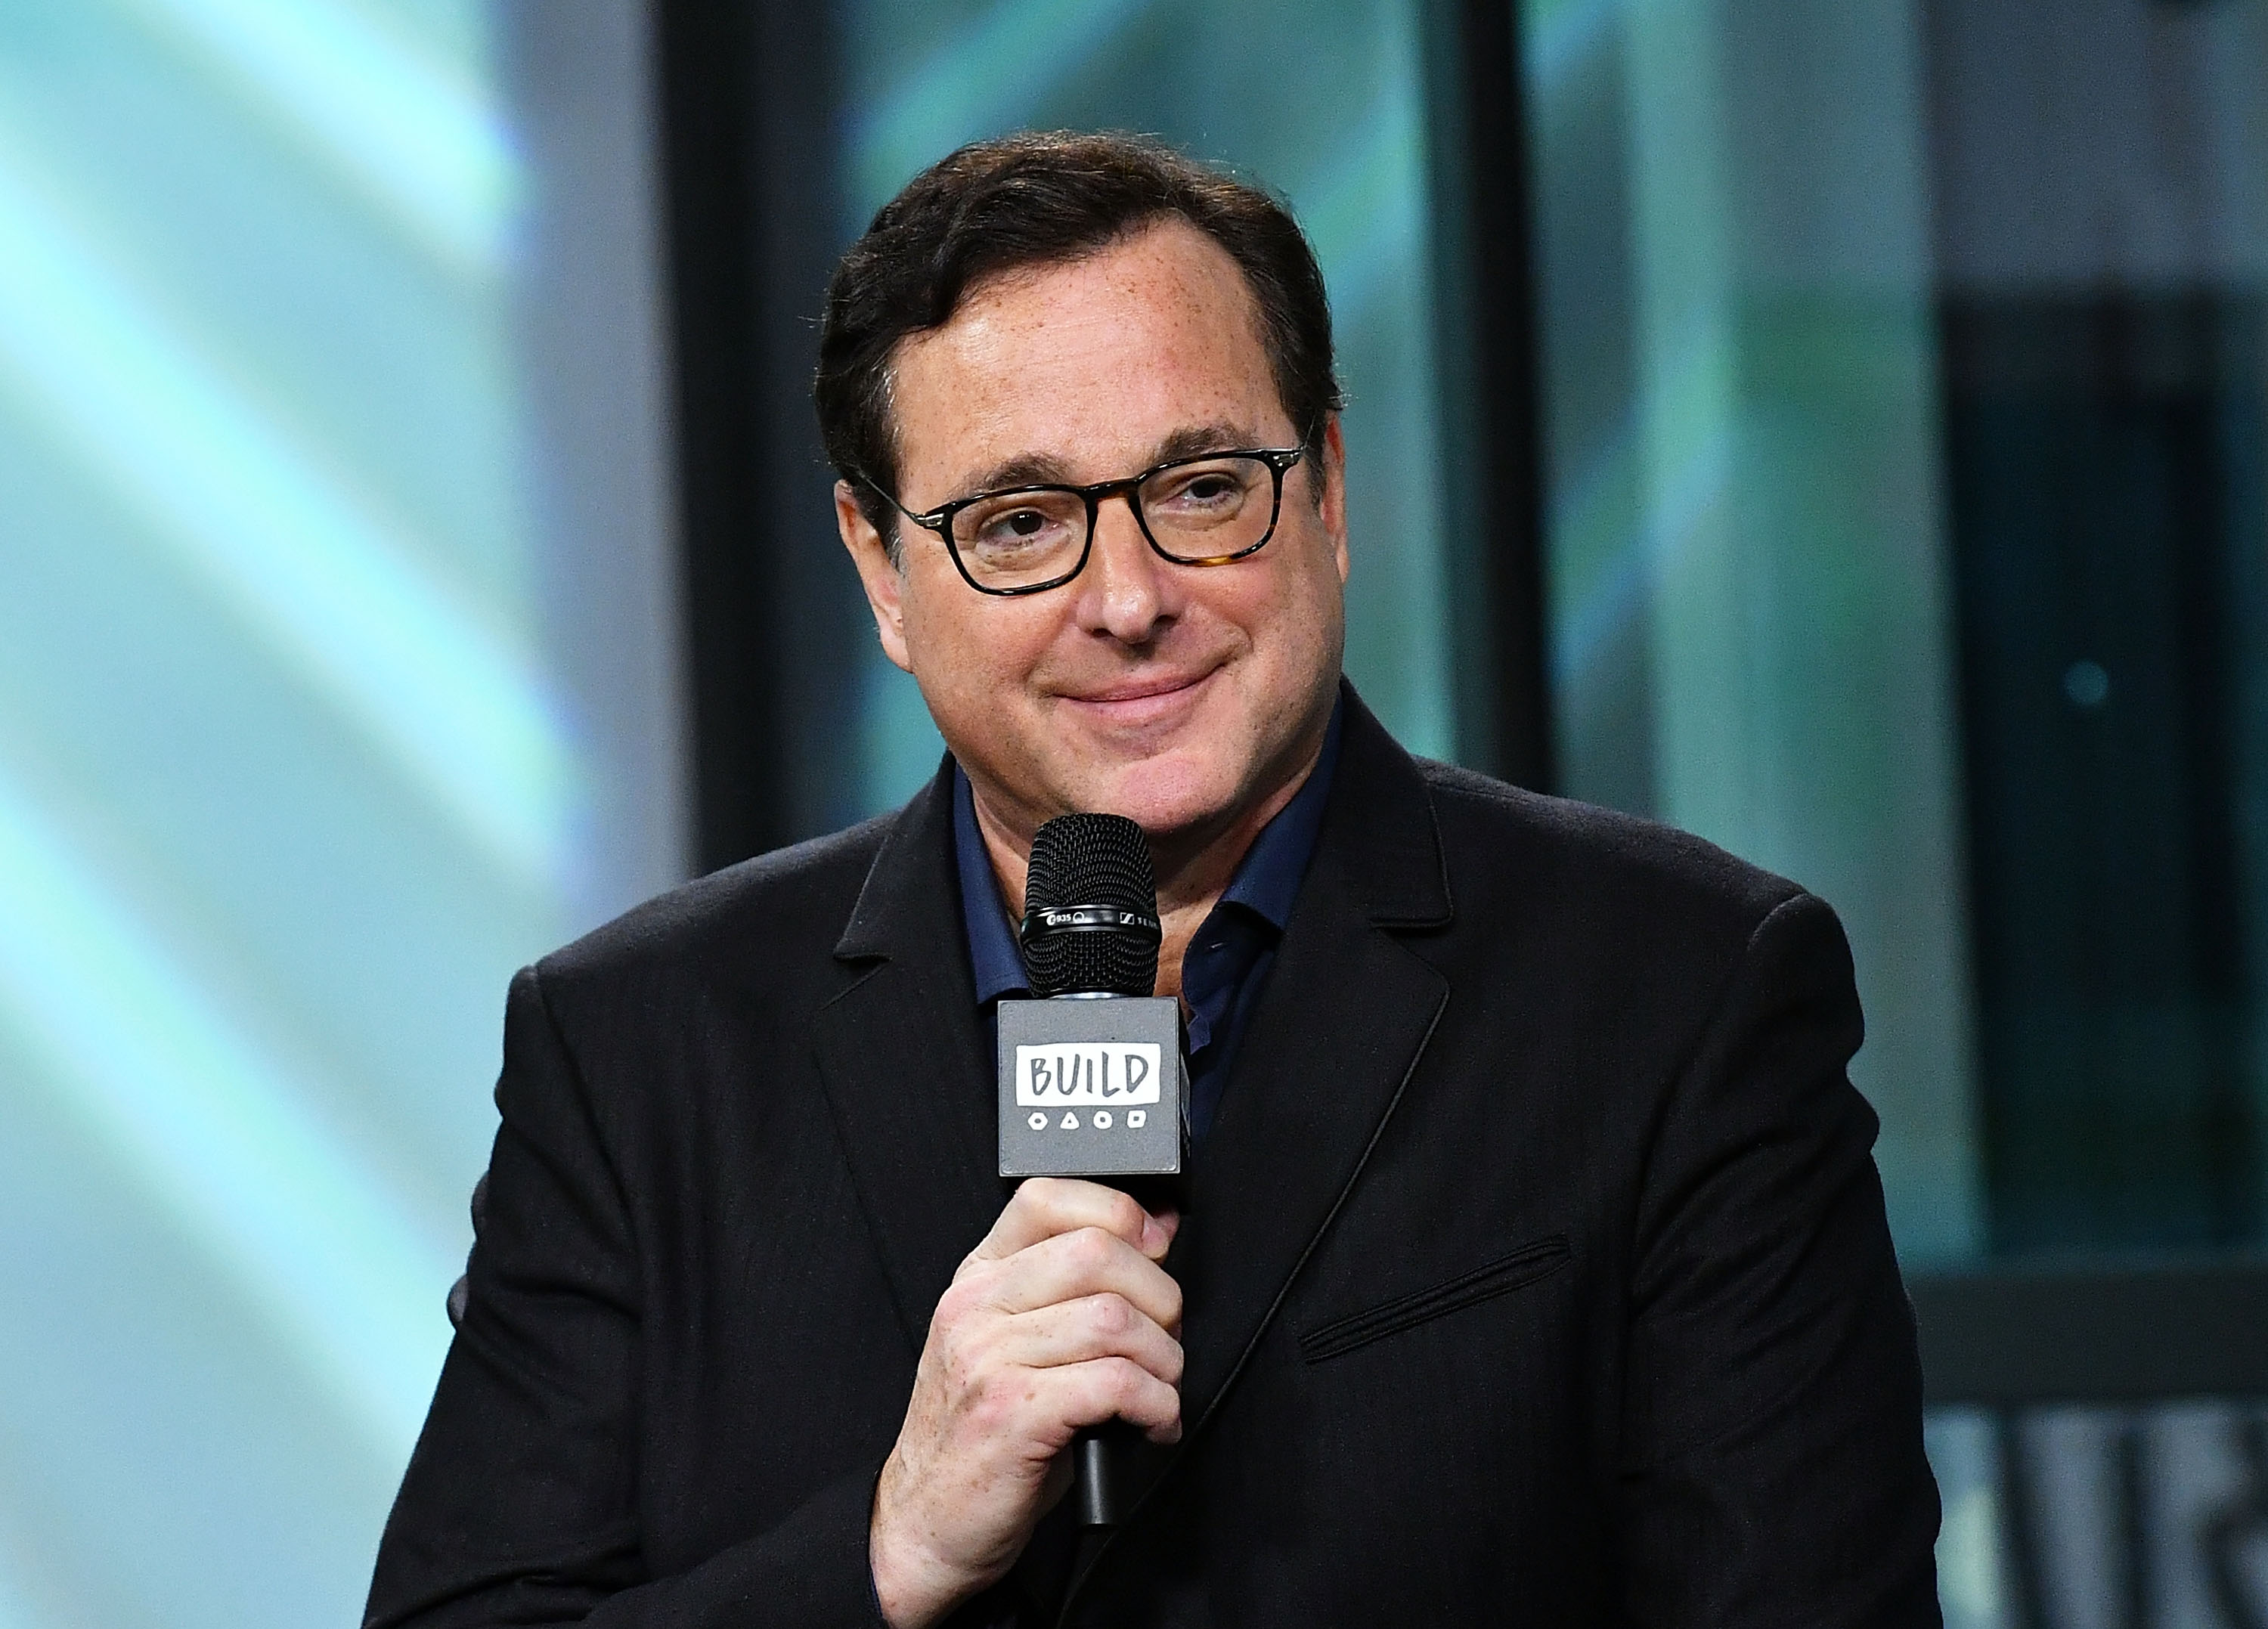 Bob Saget discusses the new season of "Fuller House" at Build Studio on September 18, 2017 | Source: Getty Images